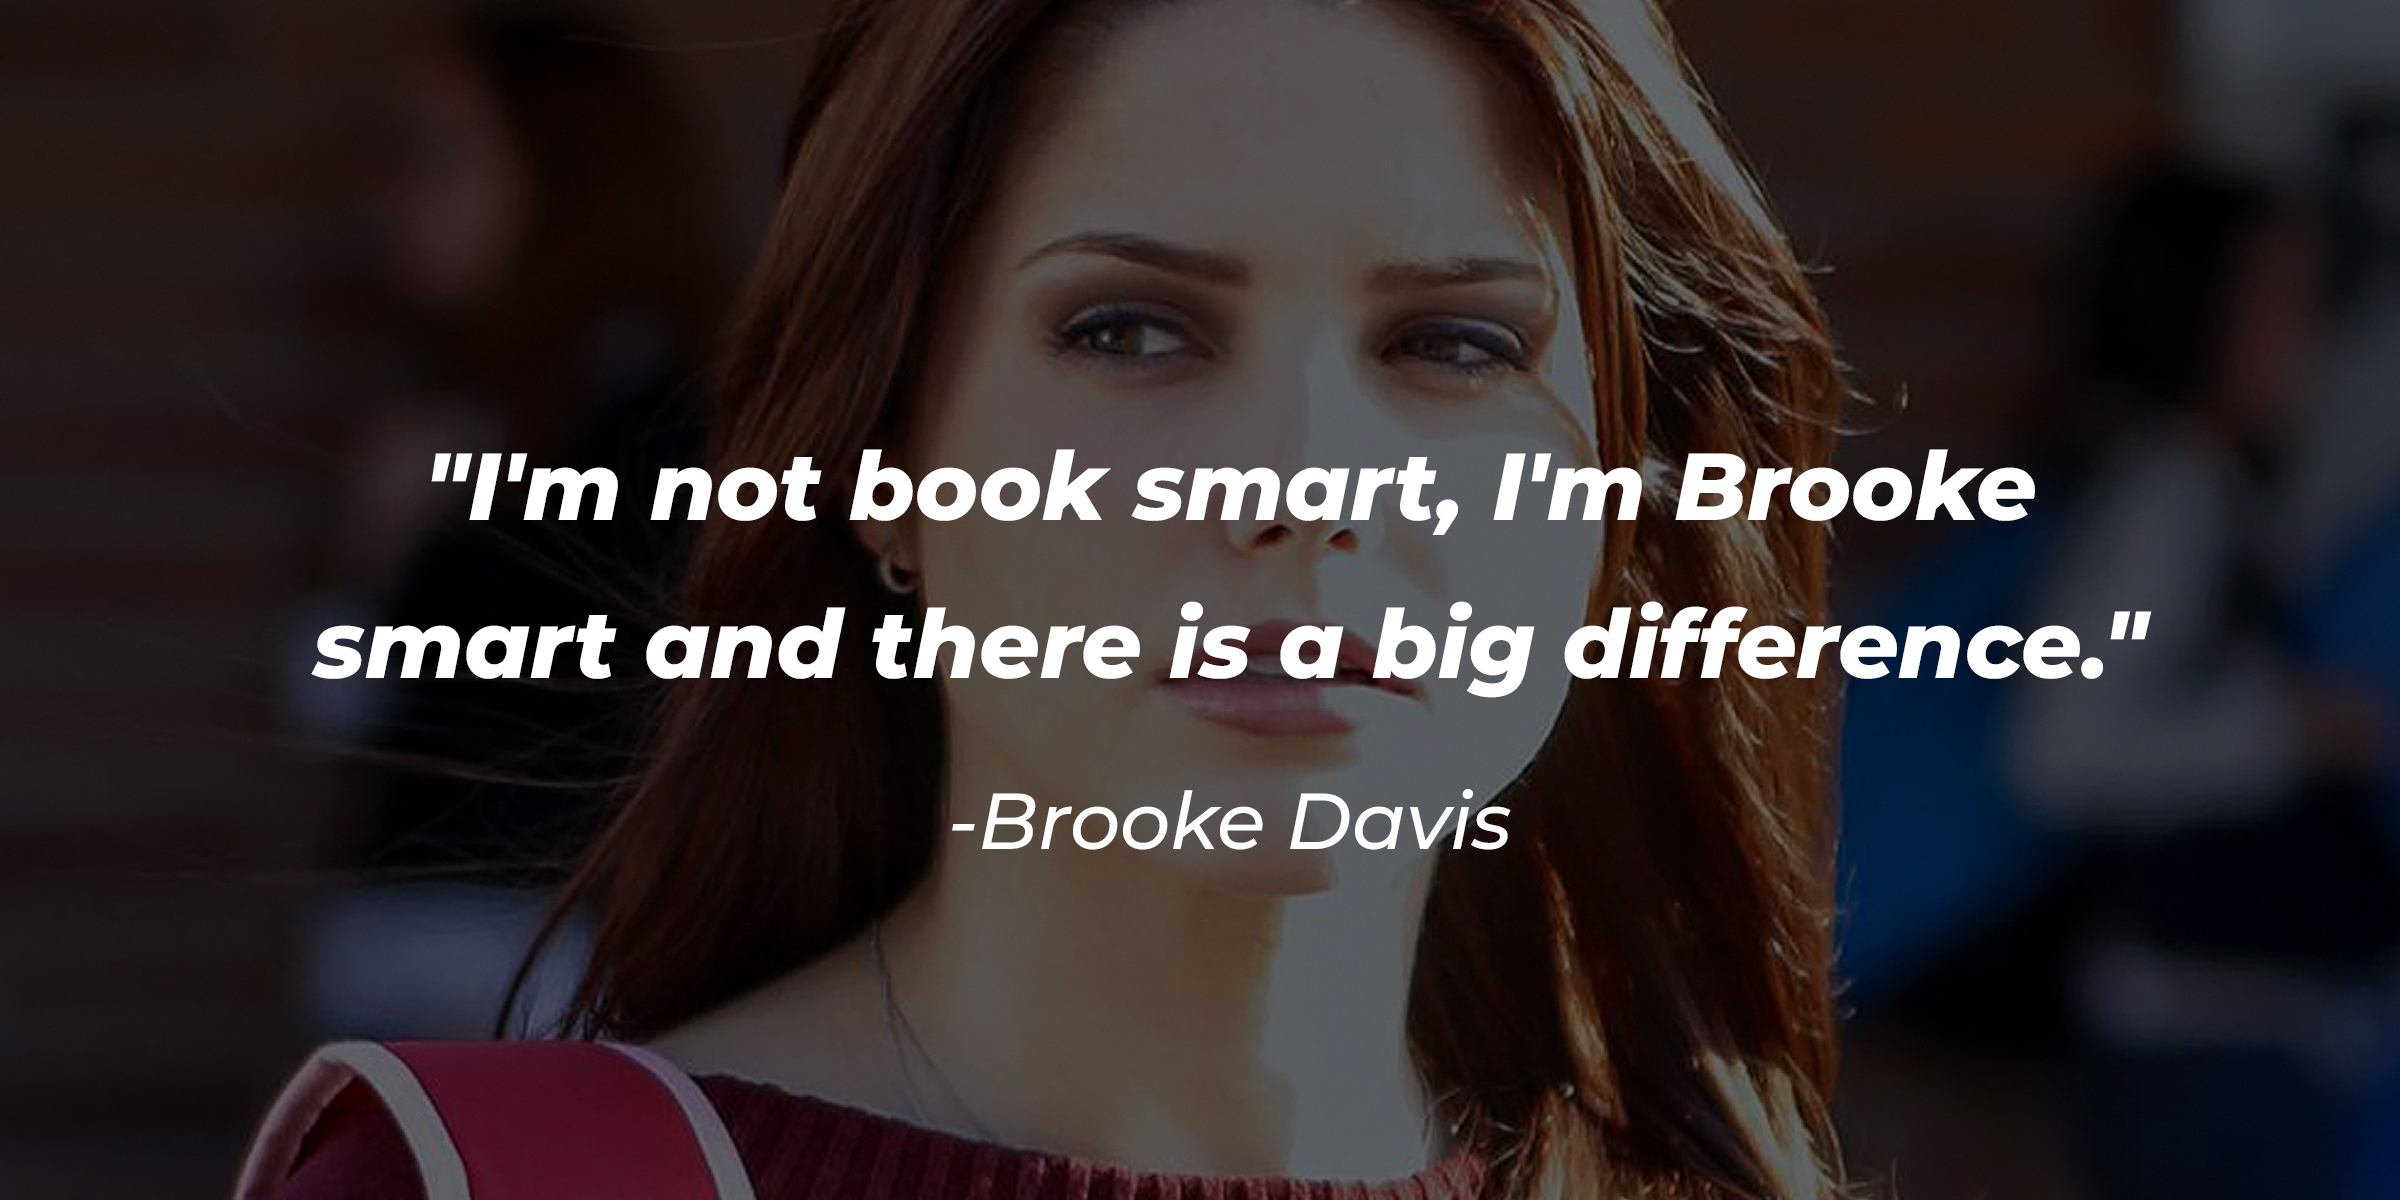 An image of Brooke Davis with her quote: "I'm not book smart, I'm Brooke smart and there is a big difference." | Source: Facebook.com/OneTreeHill